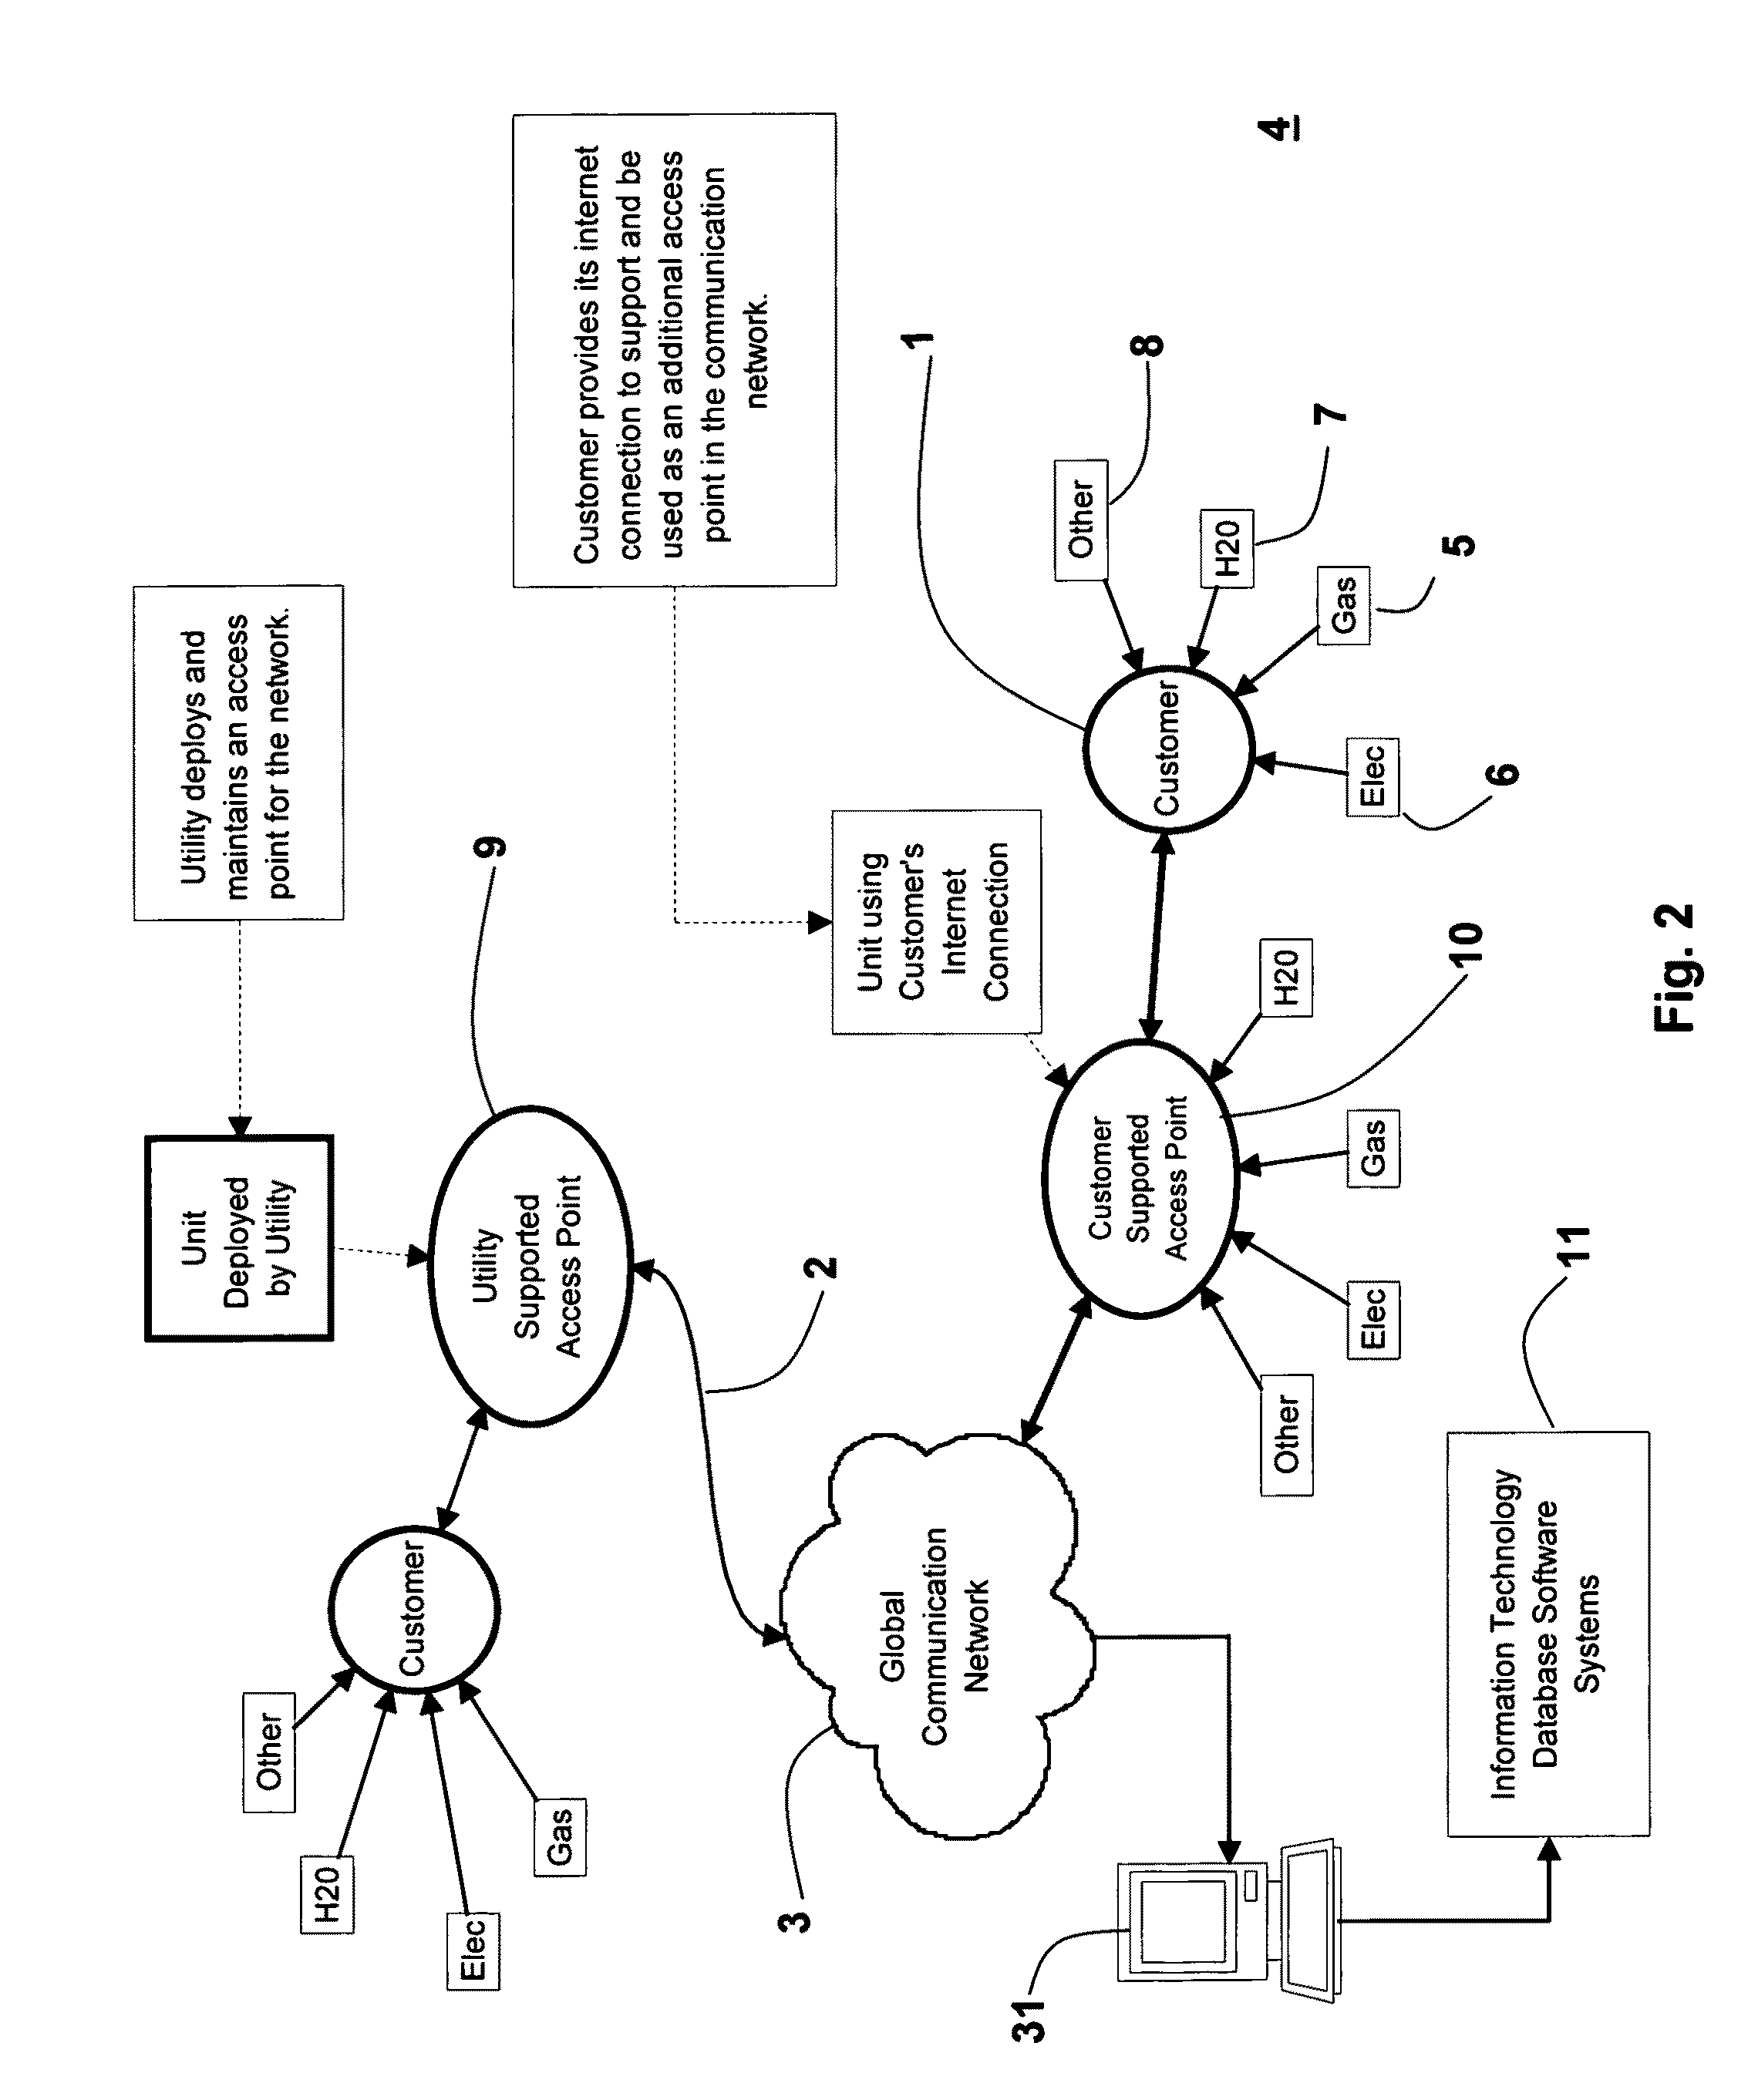 Customer supported automatic meter reading method